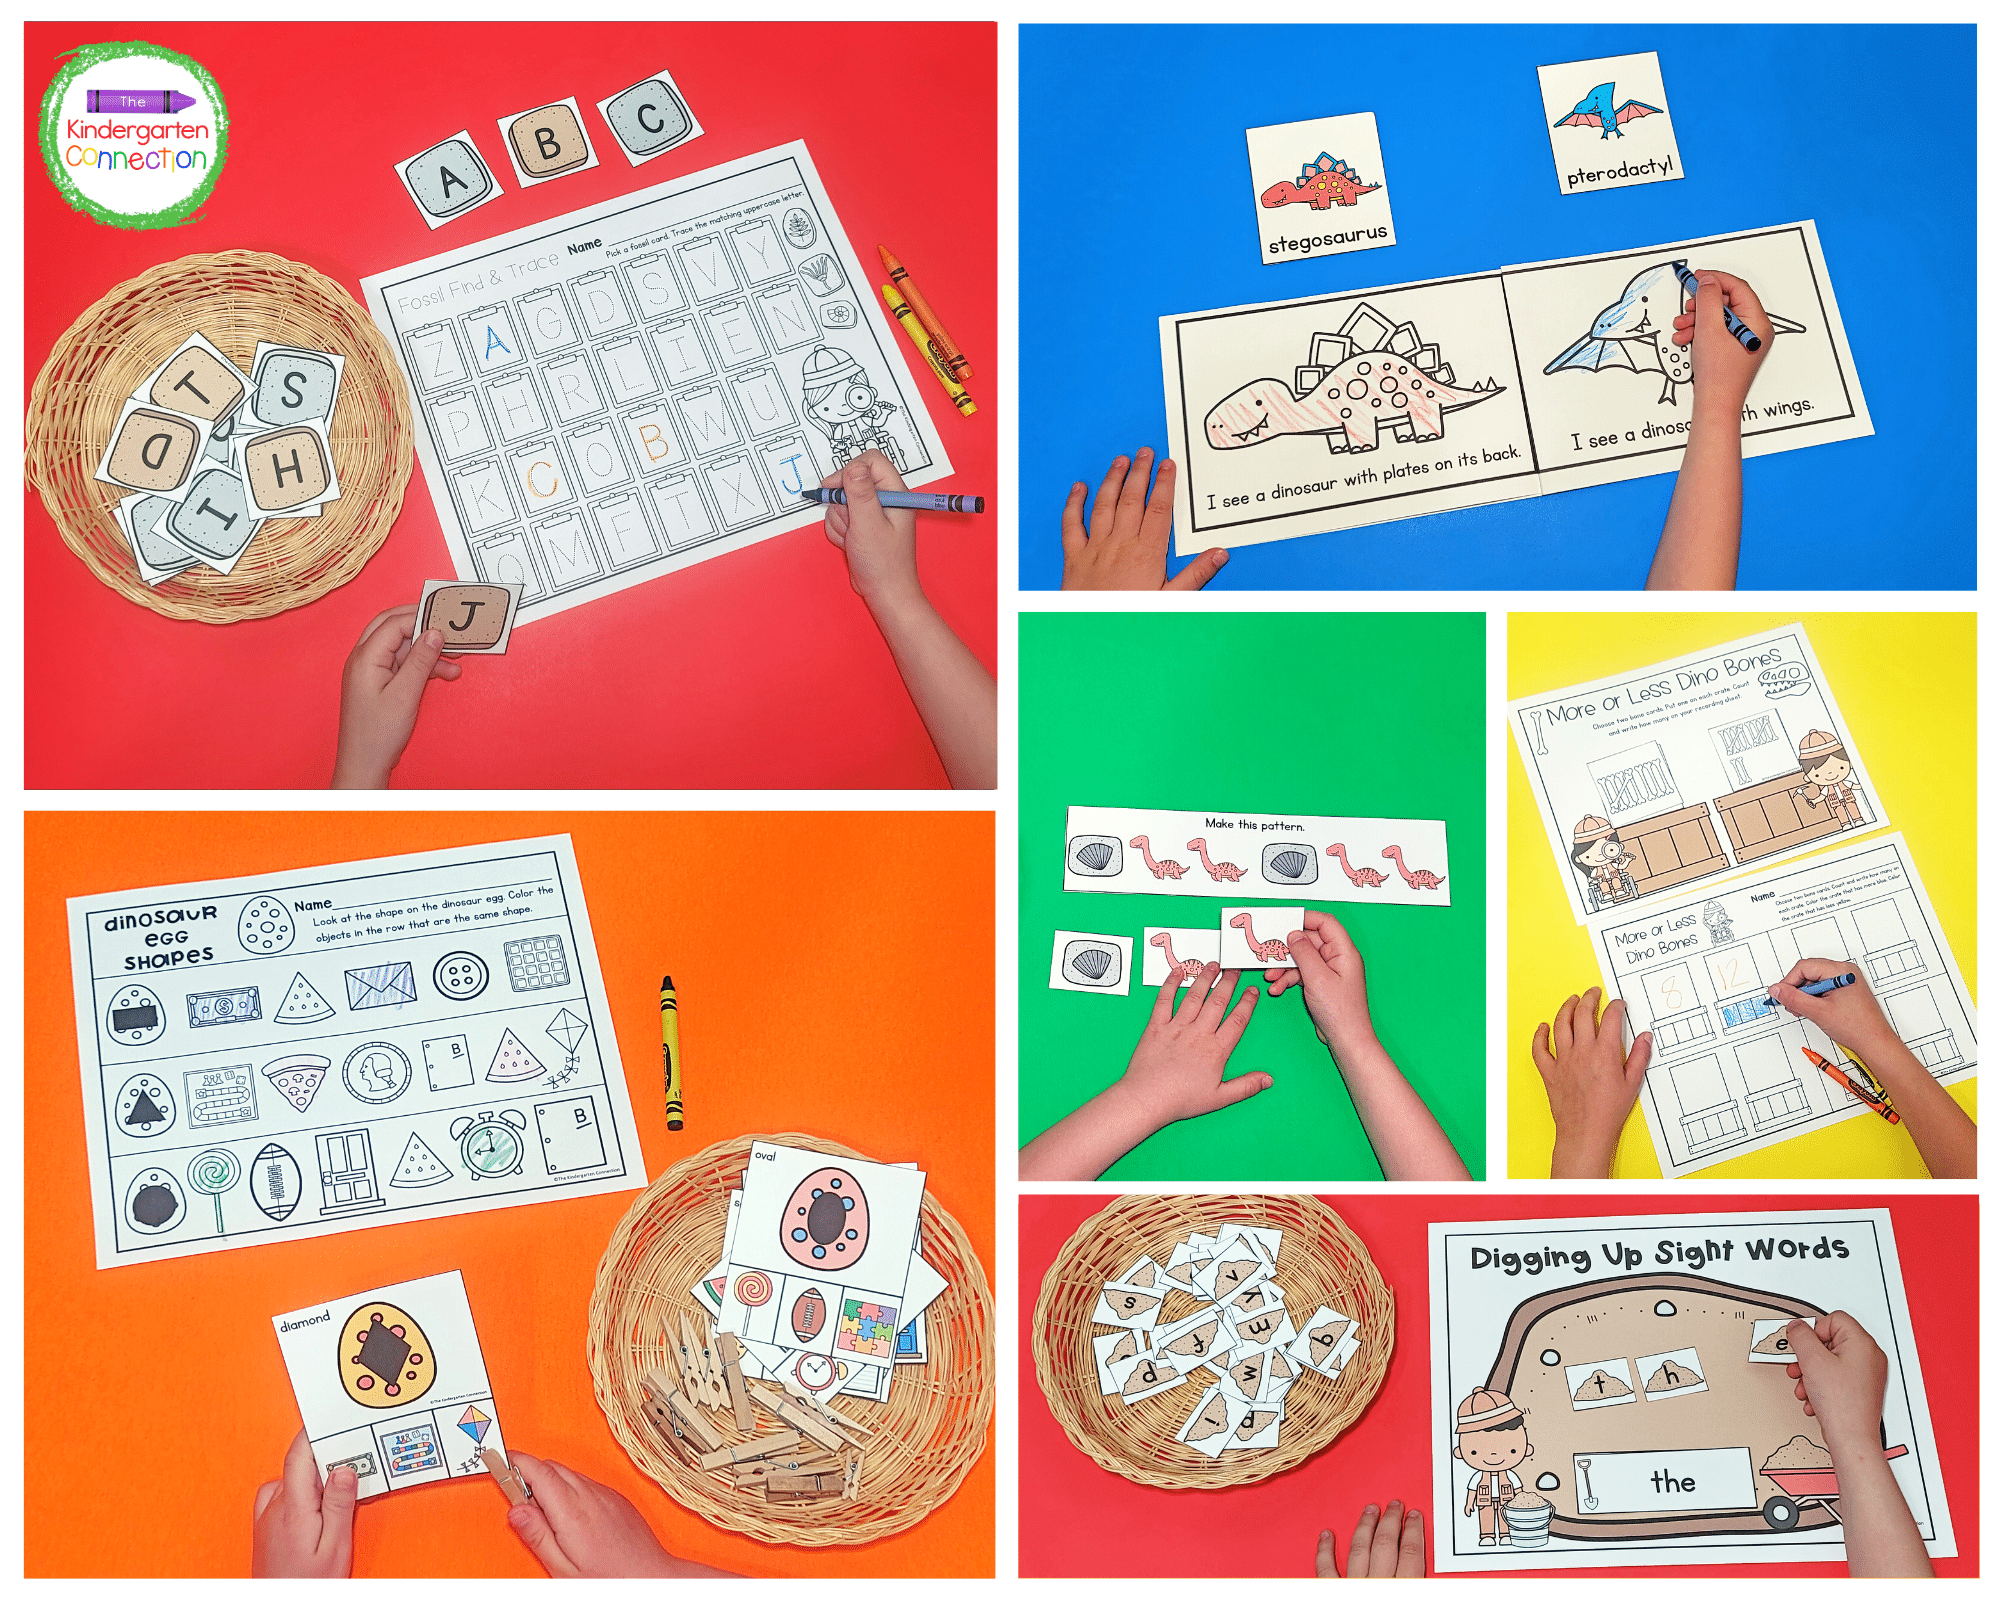 This resource pack includes hands-on dinosaur-themed math and literacy activities.